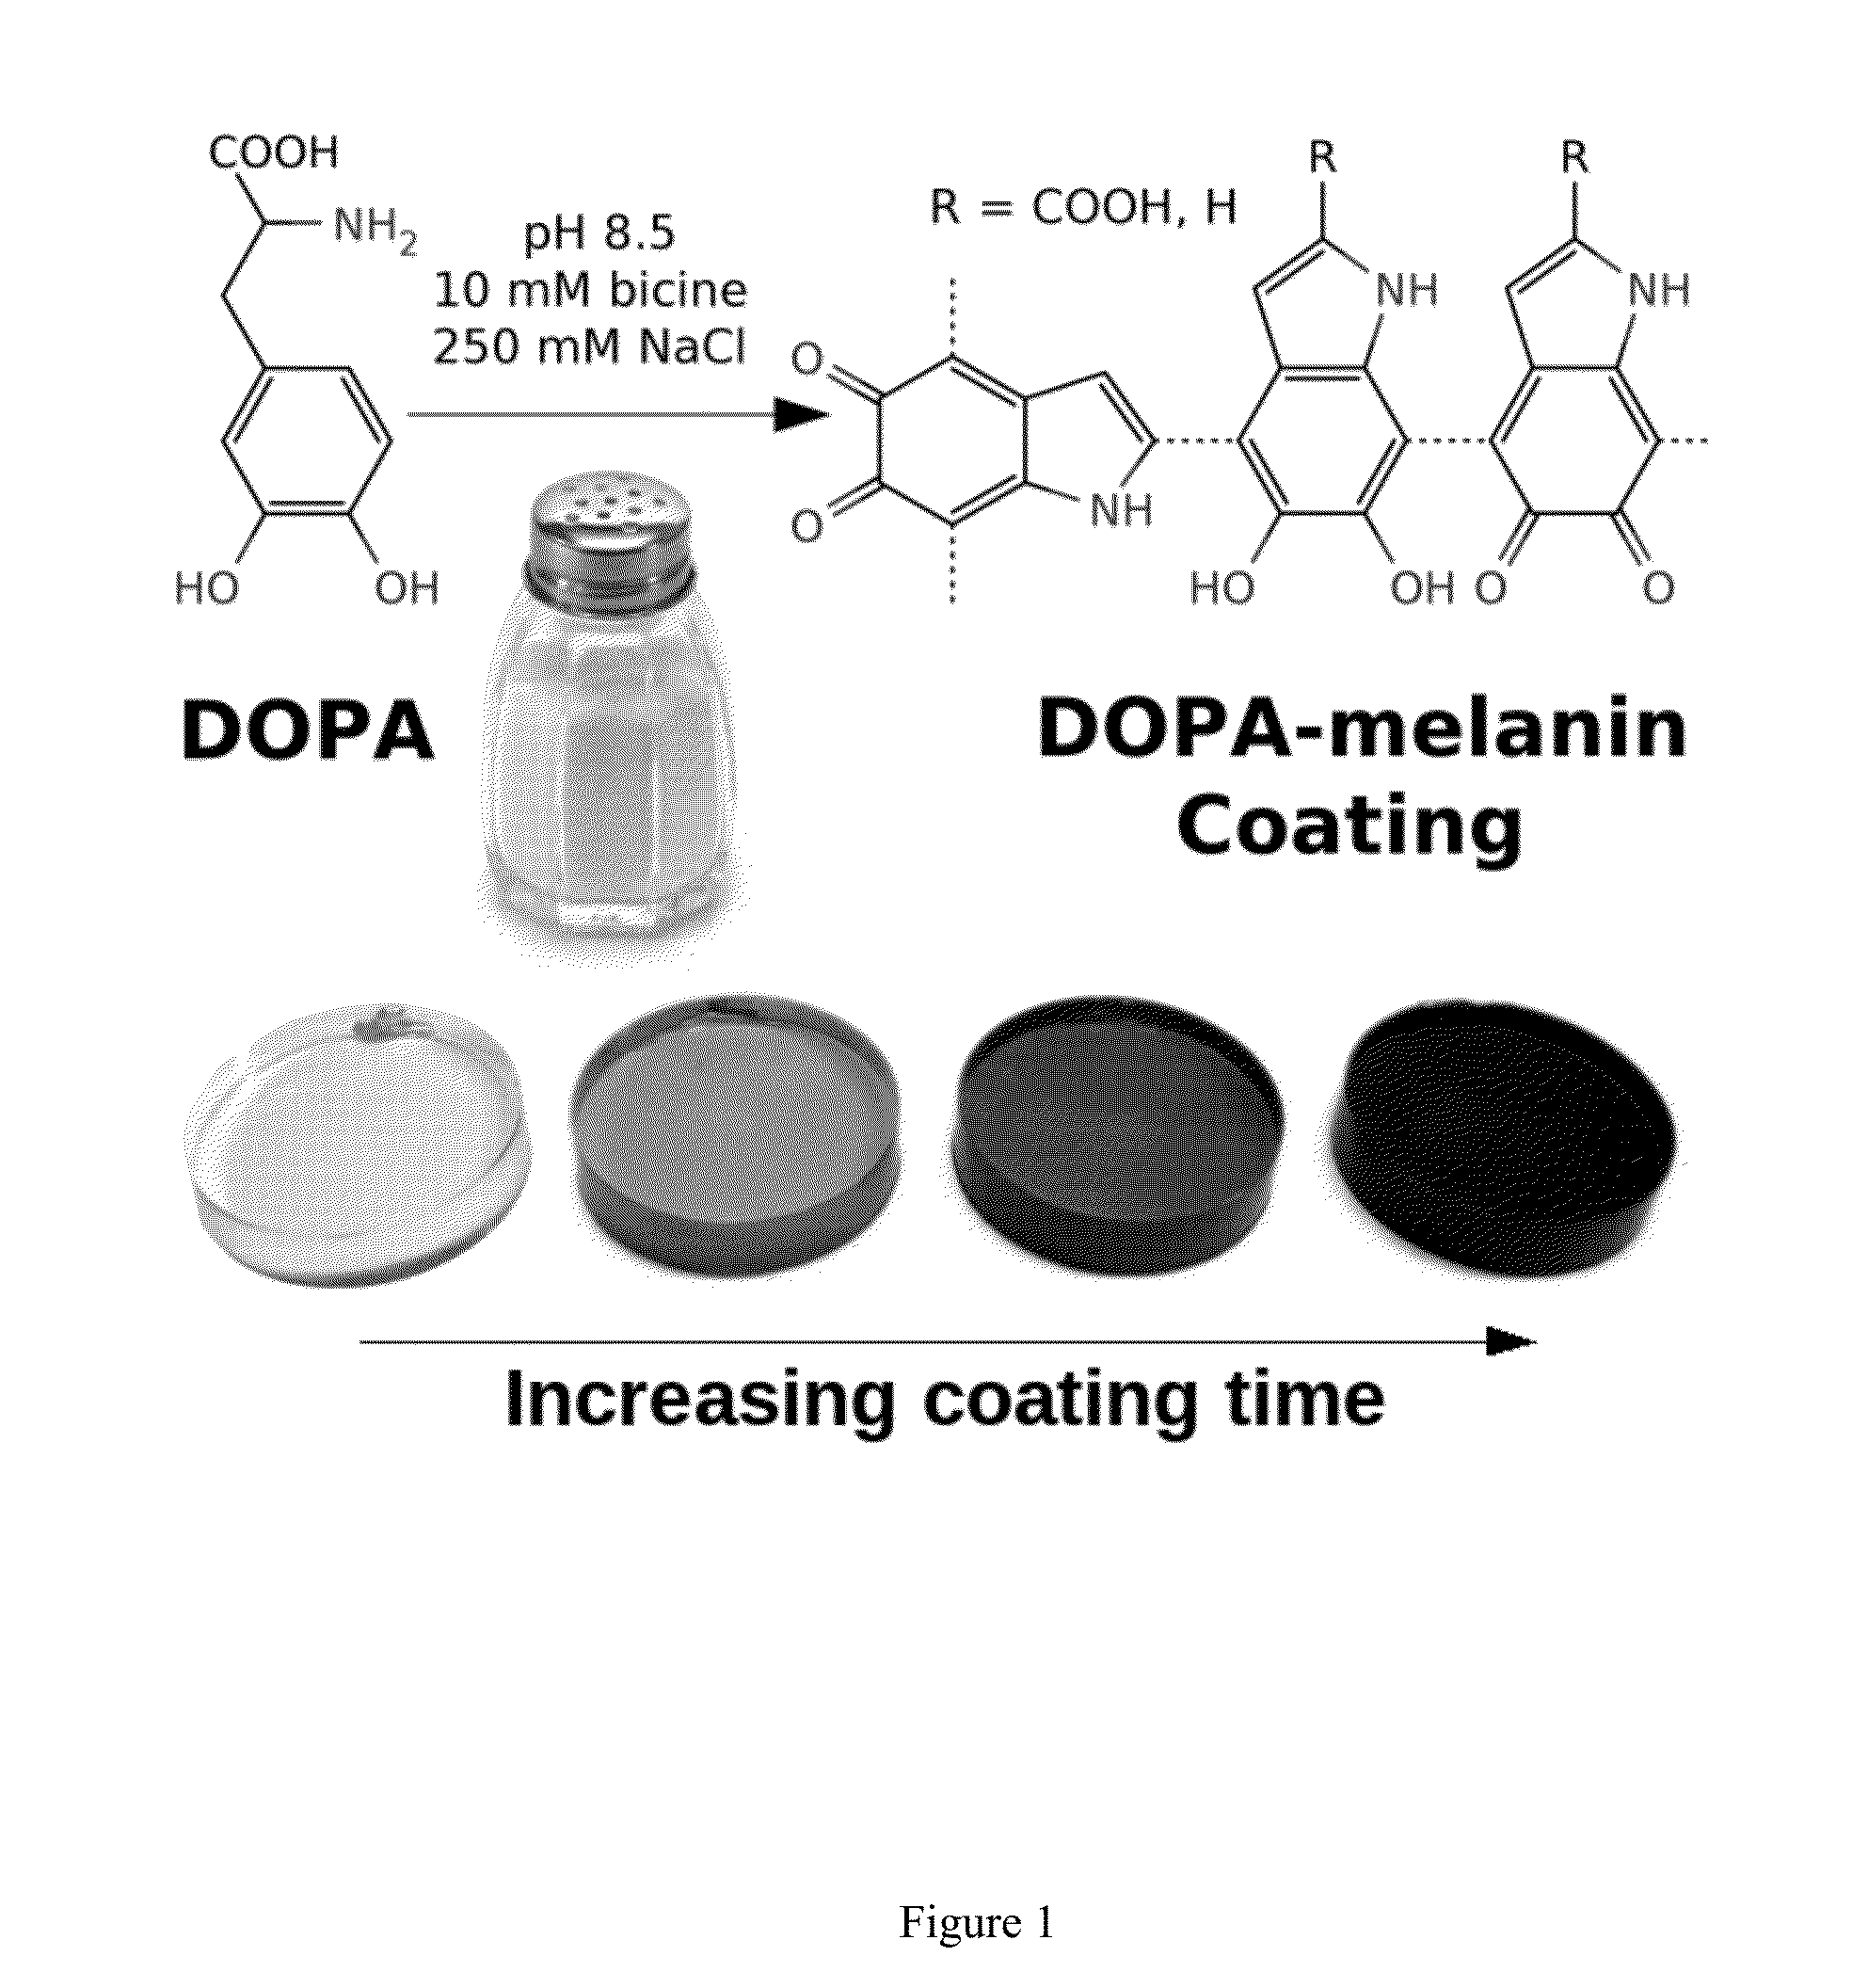 Dopa-melanin formation in high ionic strength solutions